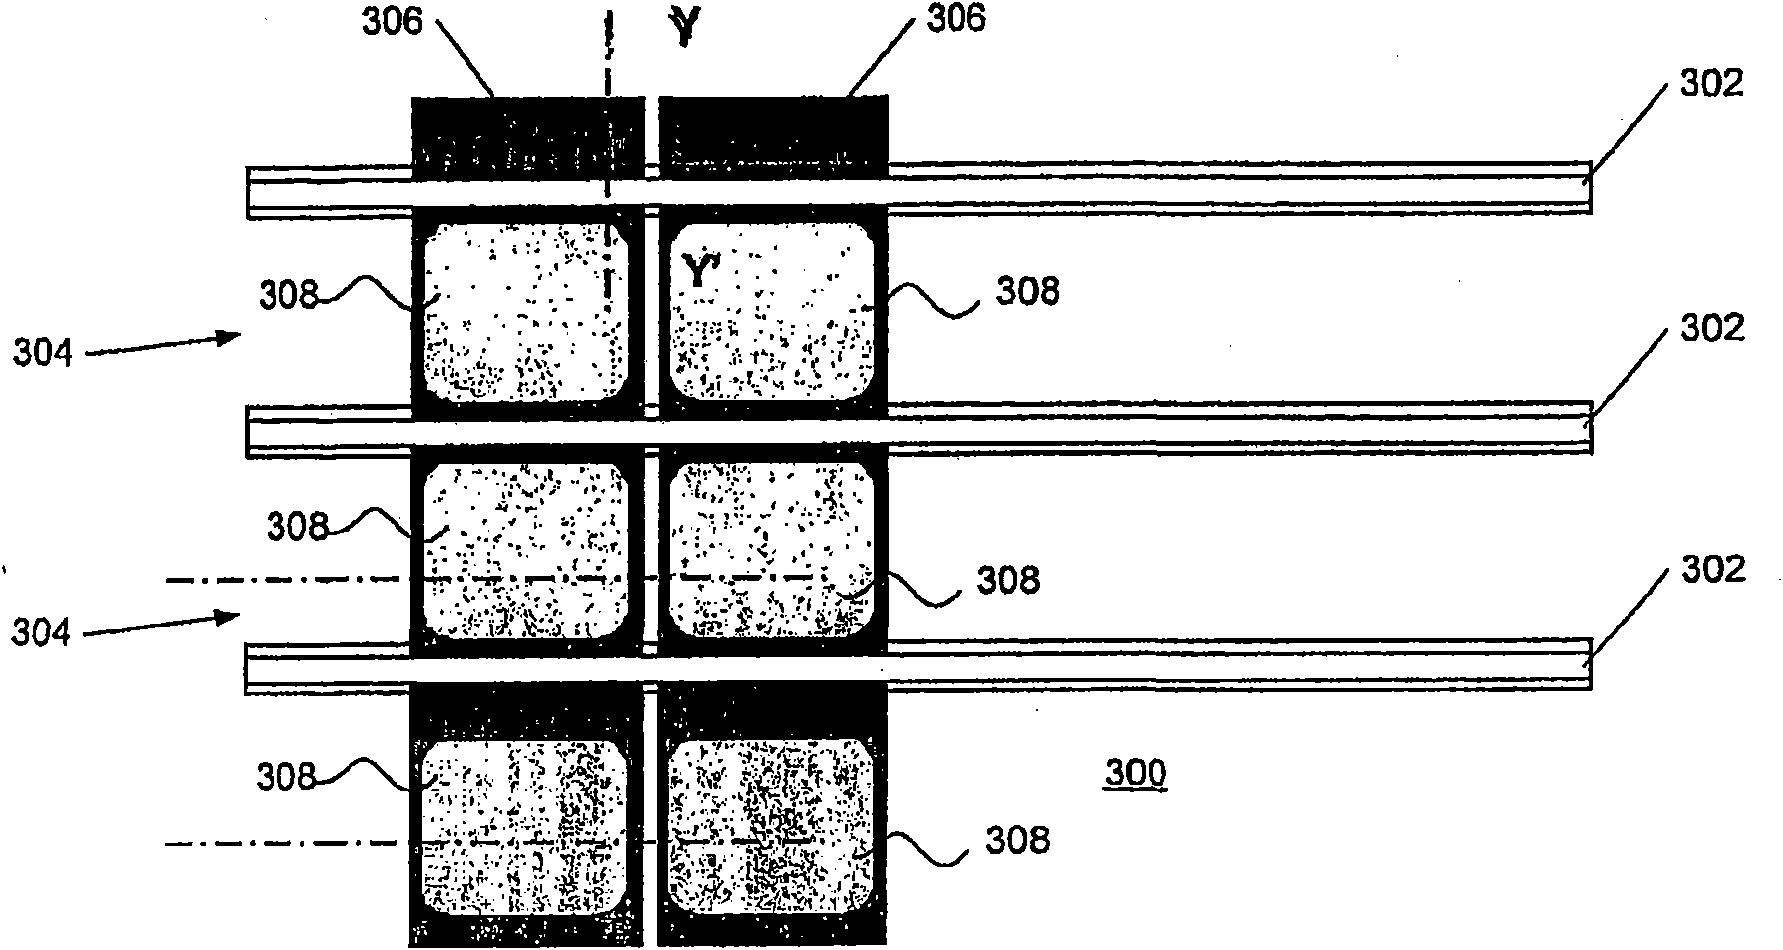 Molecular electronic device fabrication methods and structures